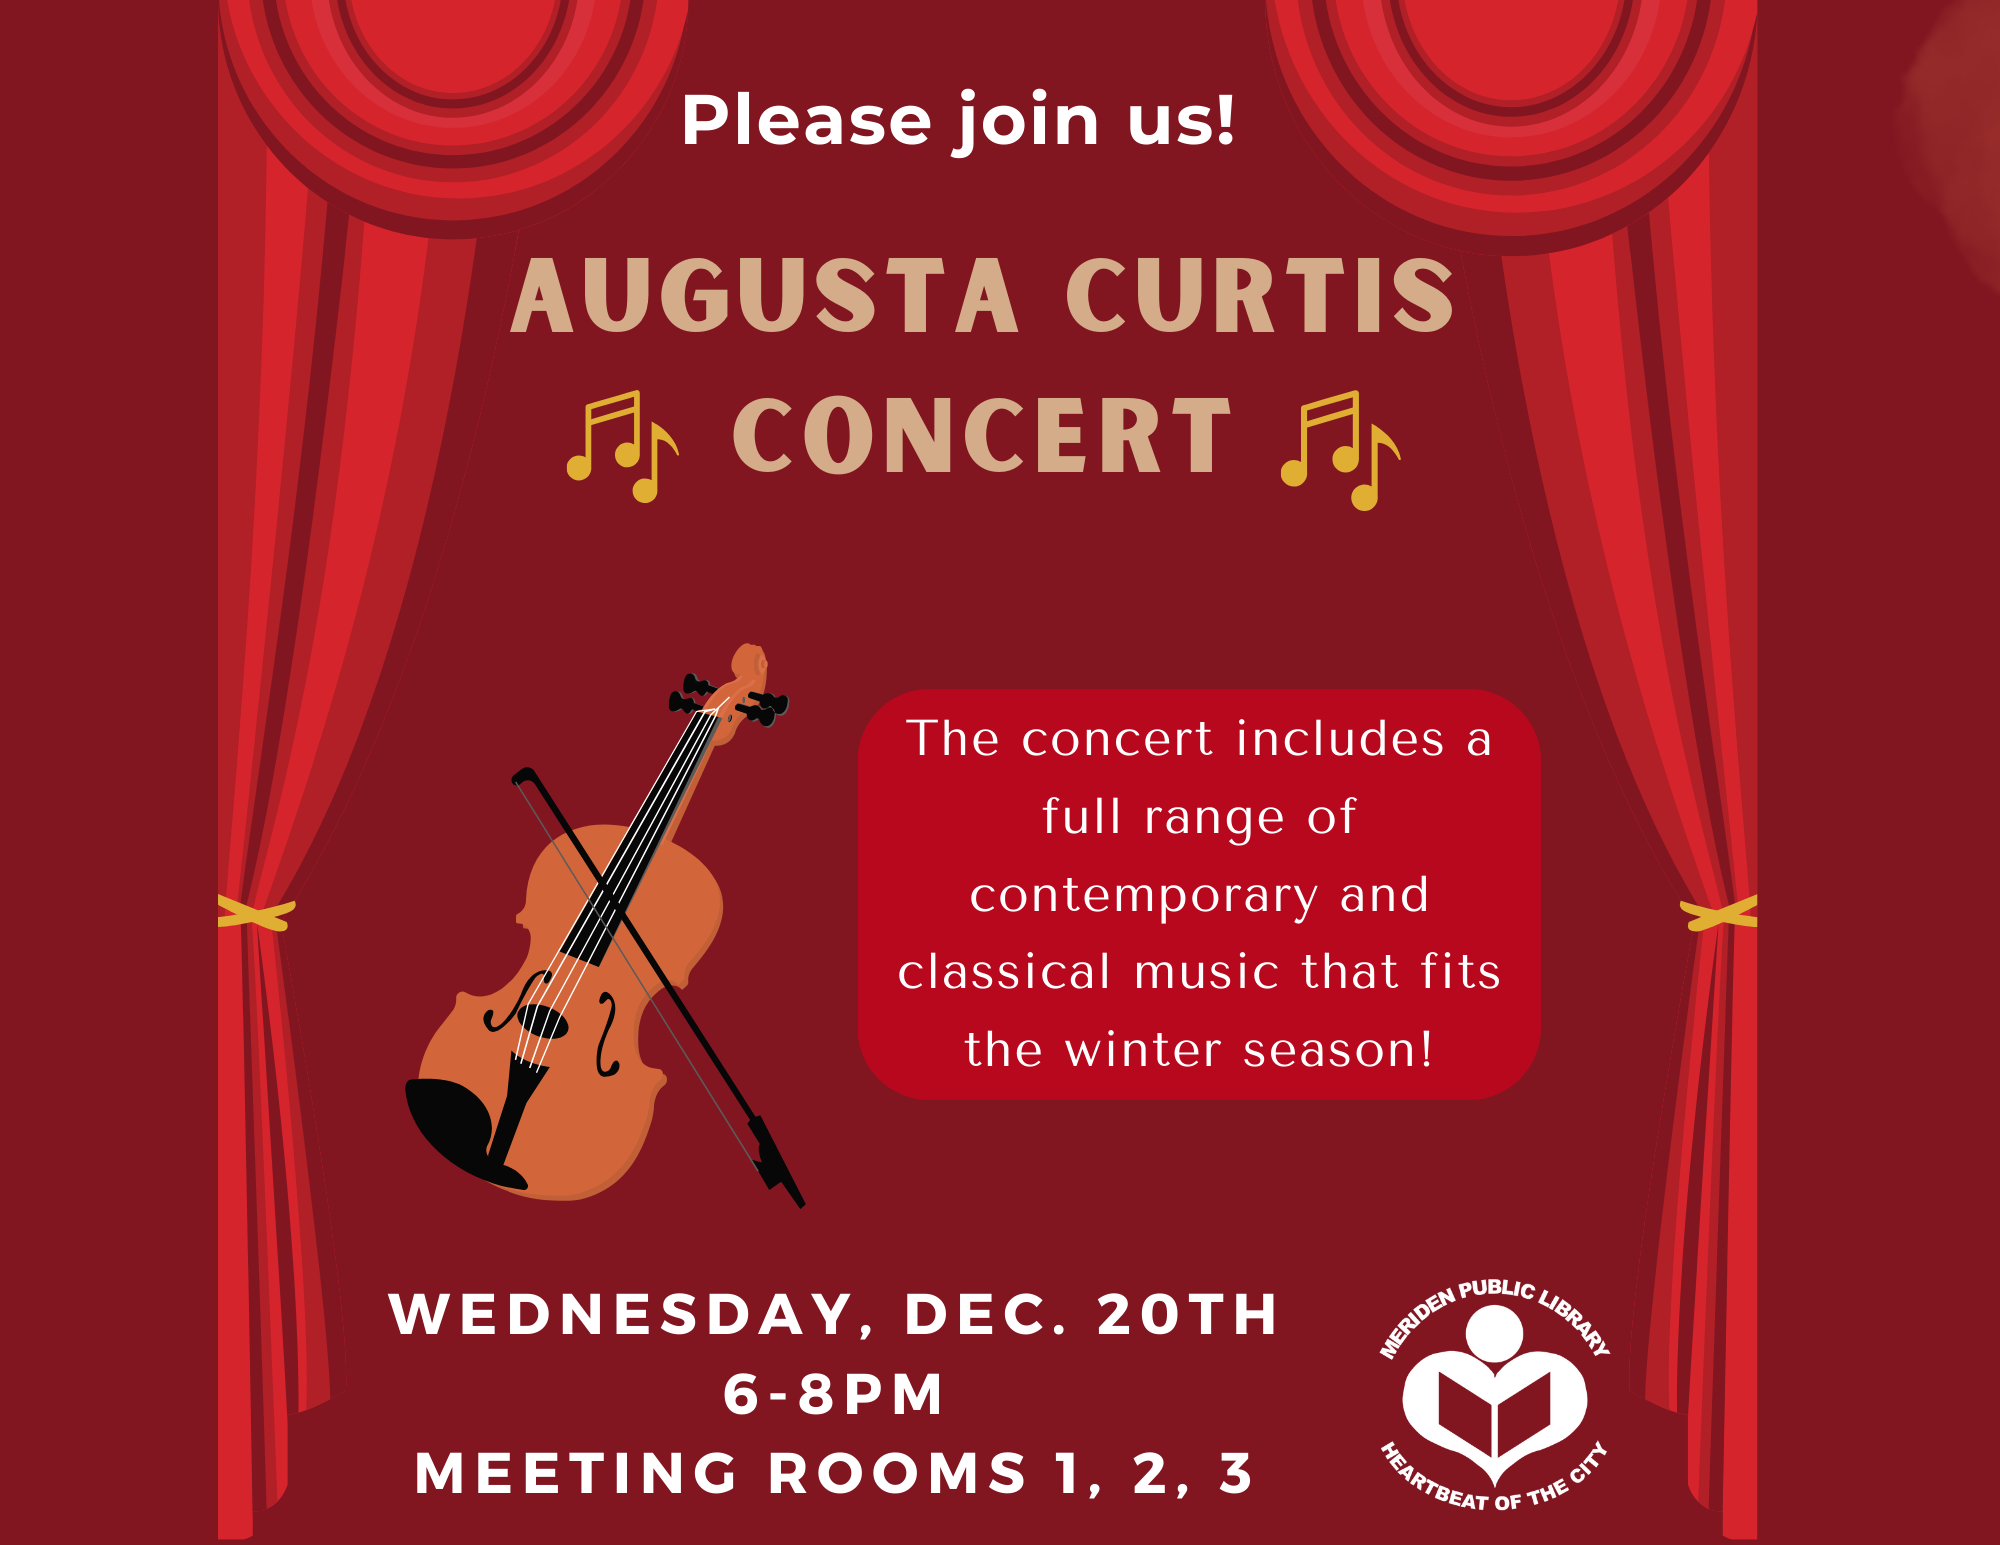 Maroon background with classical instrument and the words: "Please join us! Augusta Center Concert Wednesday, December 20th from 6-8pm in Meeting Rooms 1, 2, 3."